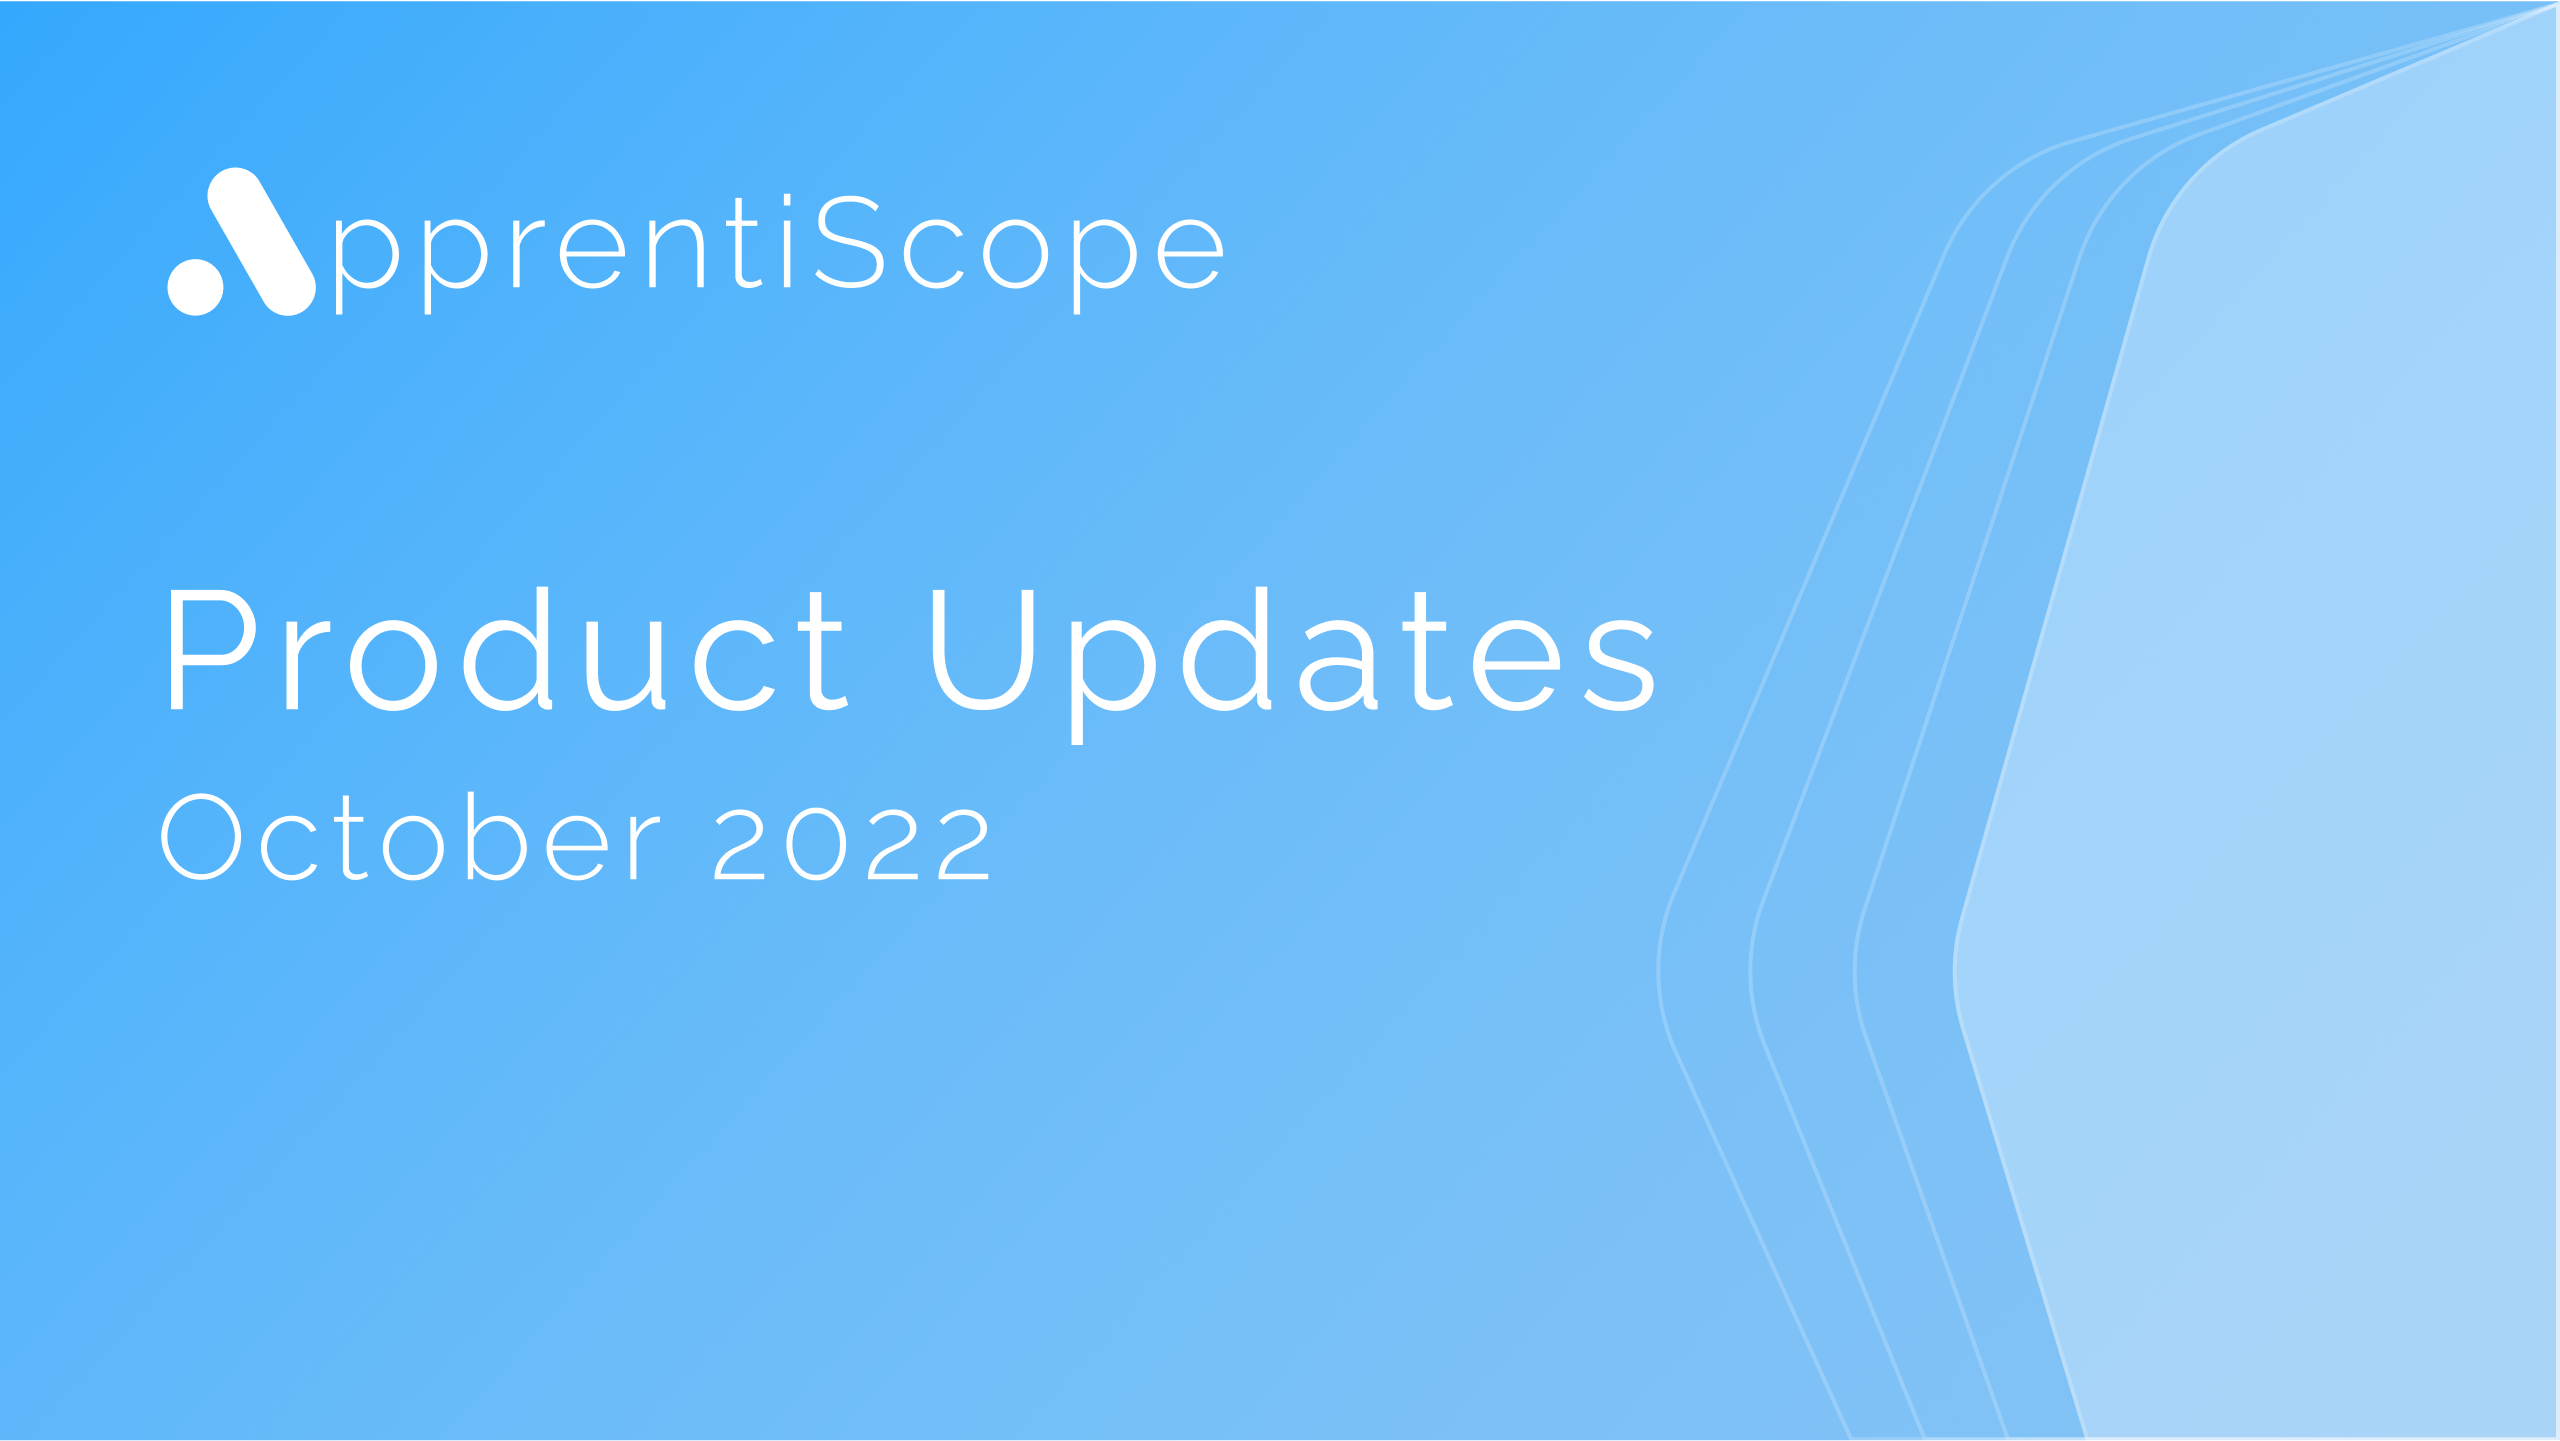 ApprentiScope Product Updates for October 2022